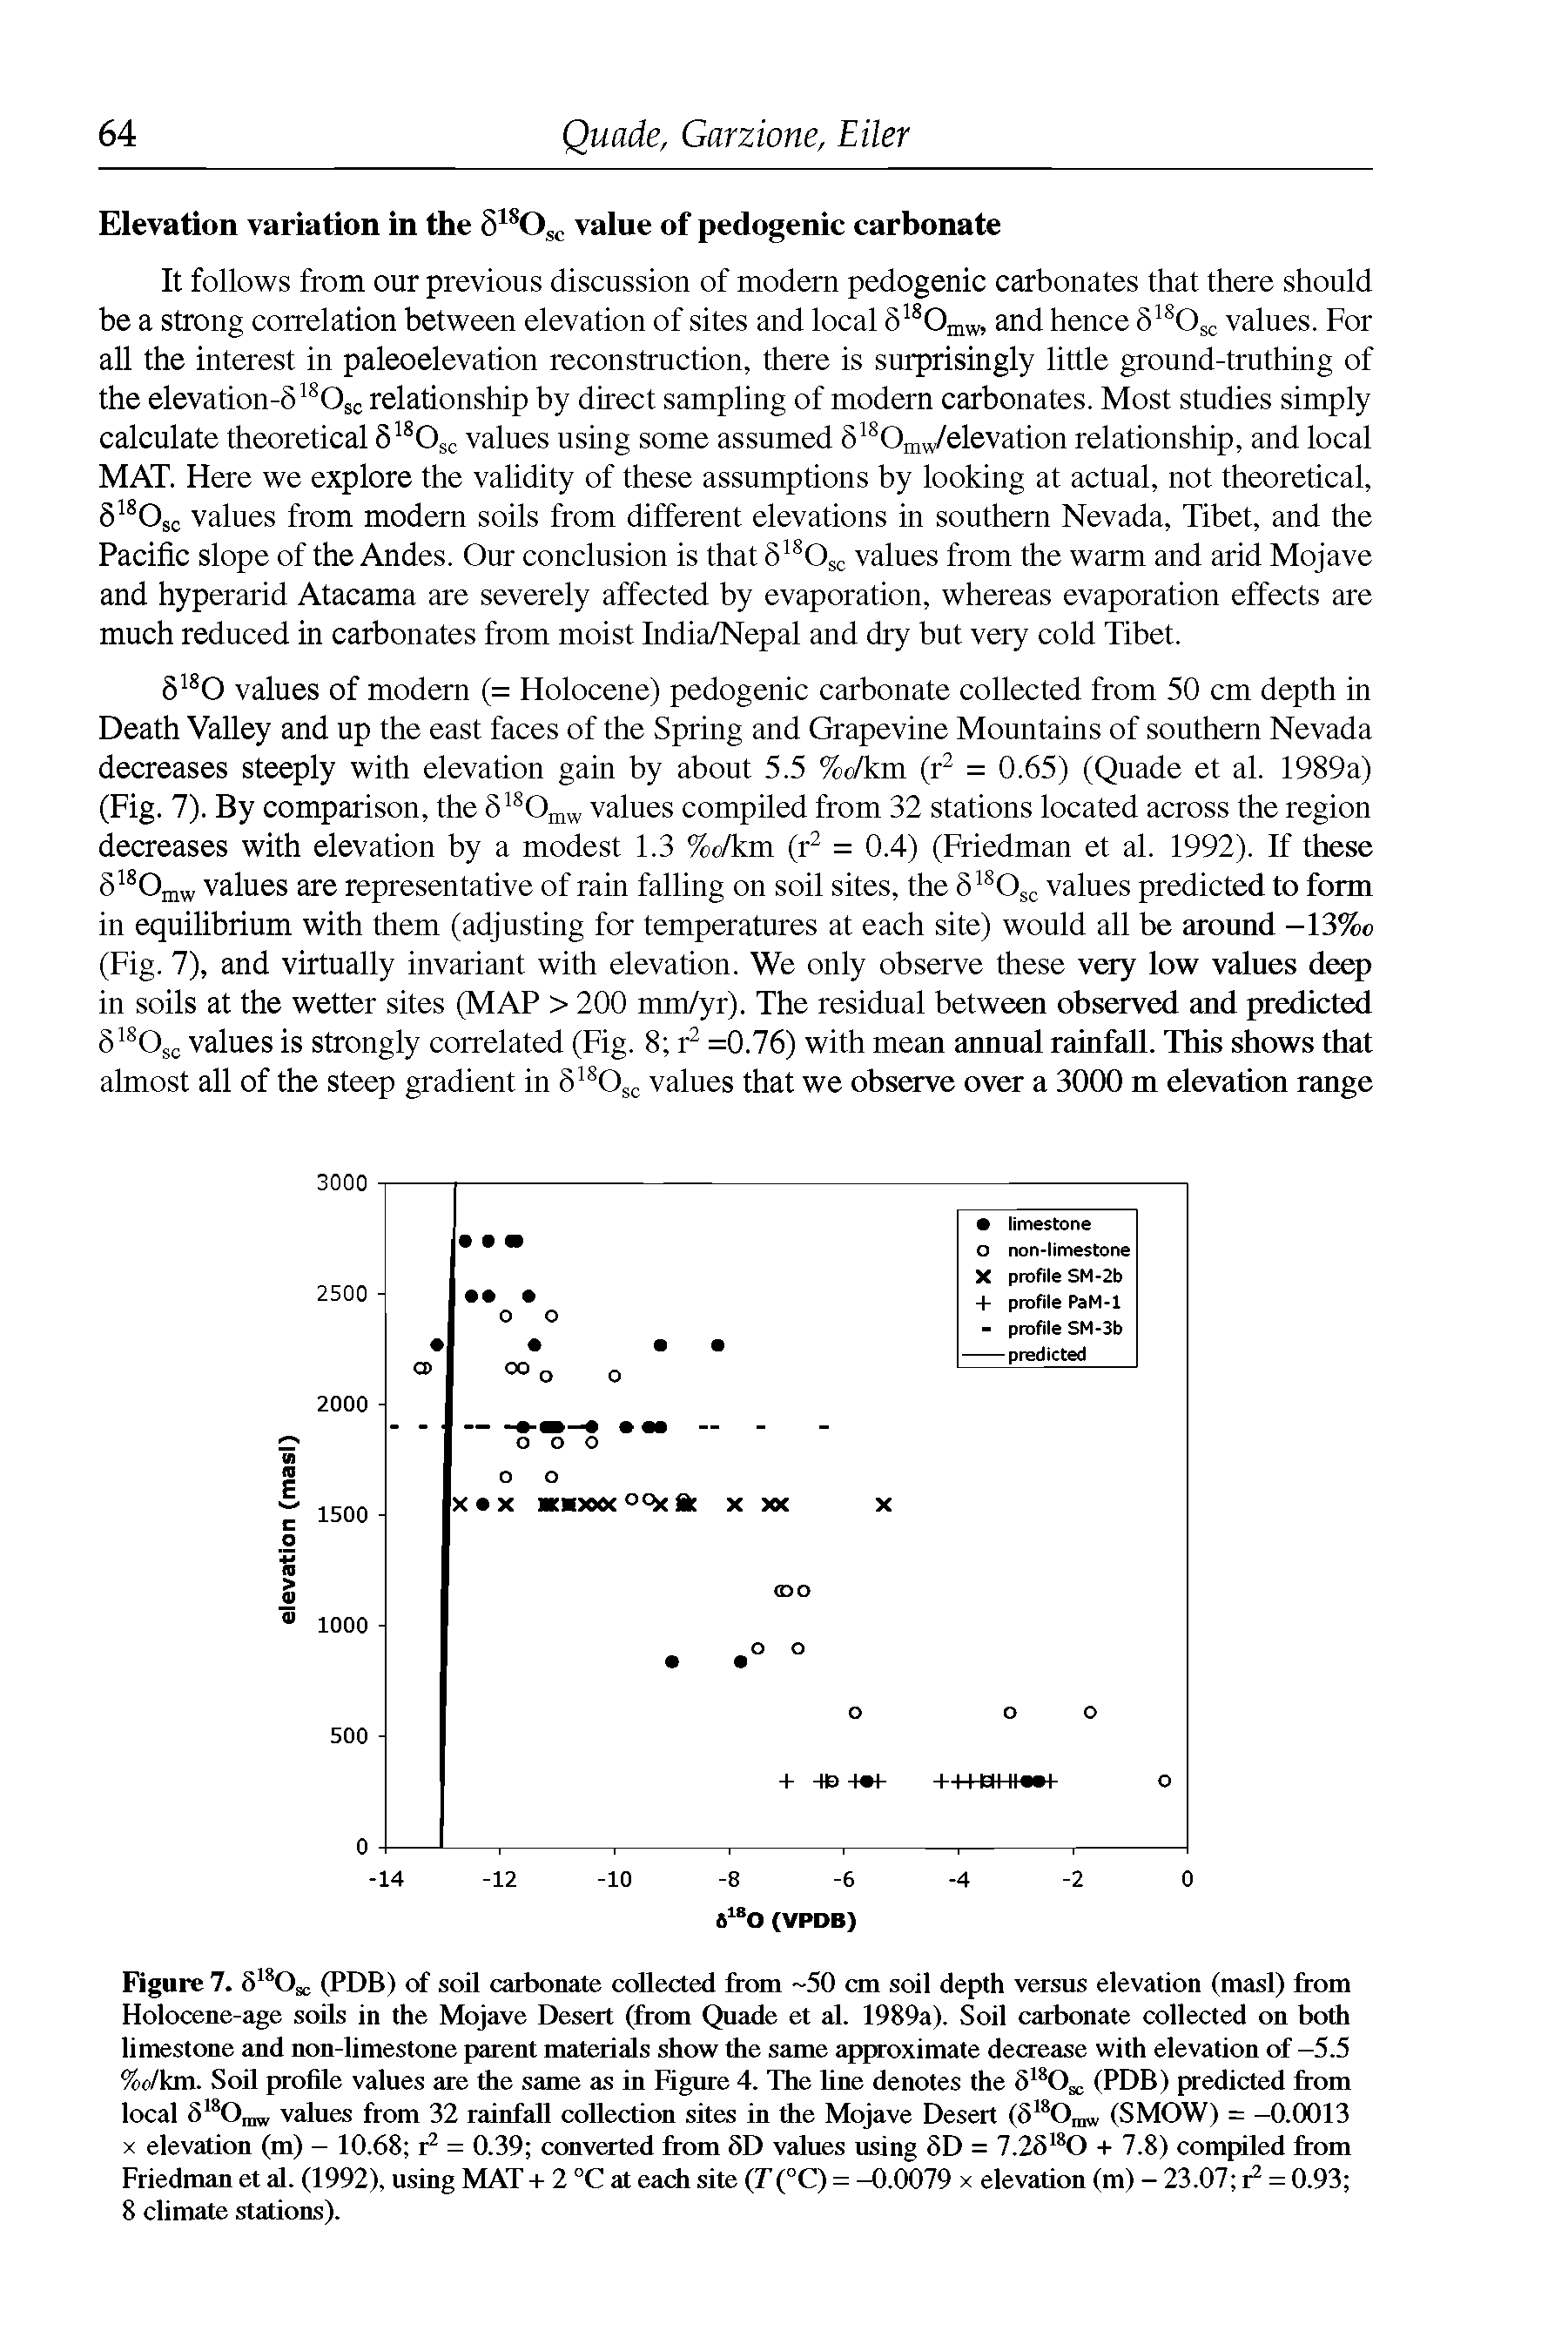 Figure 7. 518Osc (PDB) of soil carbonate collected from 50 cm soil depth versus elevation (masl) from Holocene-age soils in the Mojave Desert (from Quade et al. 1989a). Soil carbonate collected on both limestone and non-limestone parent materials show die same approximate decrease with elevation of —5.5 %o/km. Soil profile values are the same as in Figure 4. The line denotes the 5 0 (PDB) predicted from local values from 32 rainfall collection sites in the Mojave Desert (518Omw (SMOW) = -0.0013...